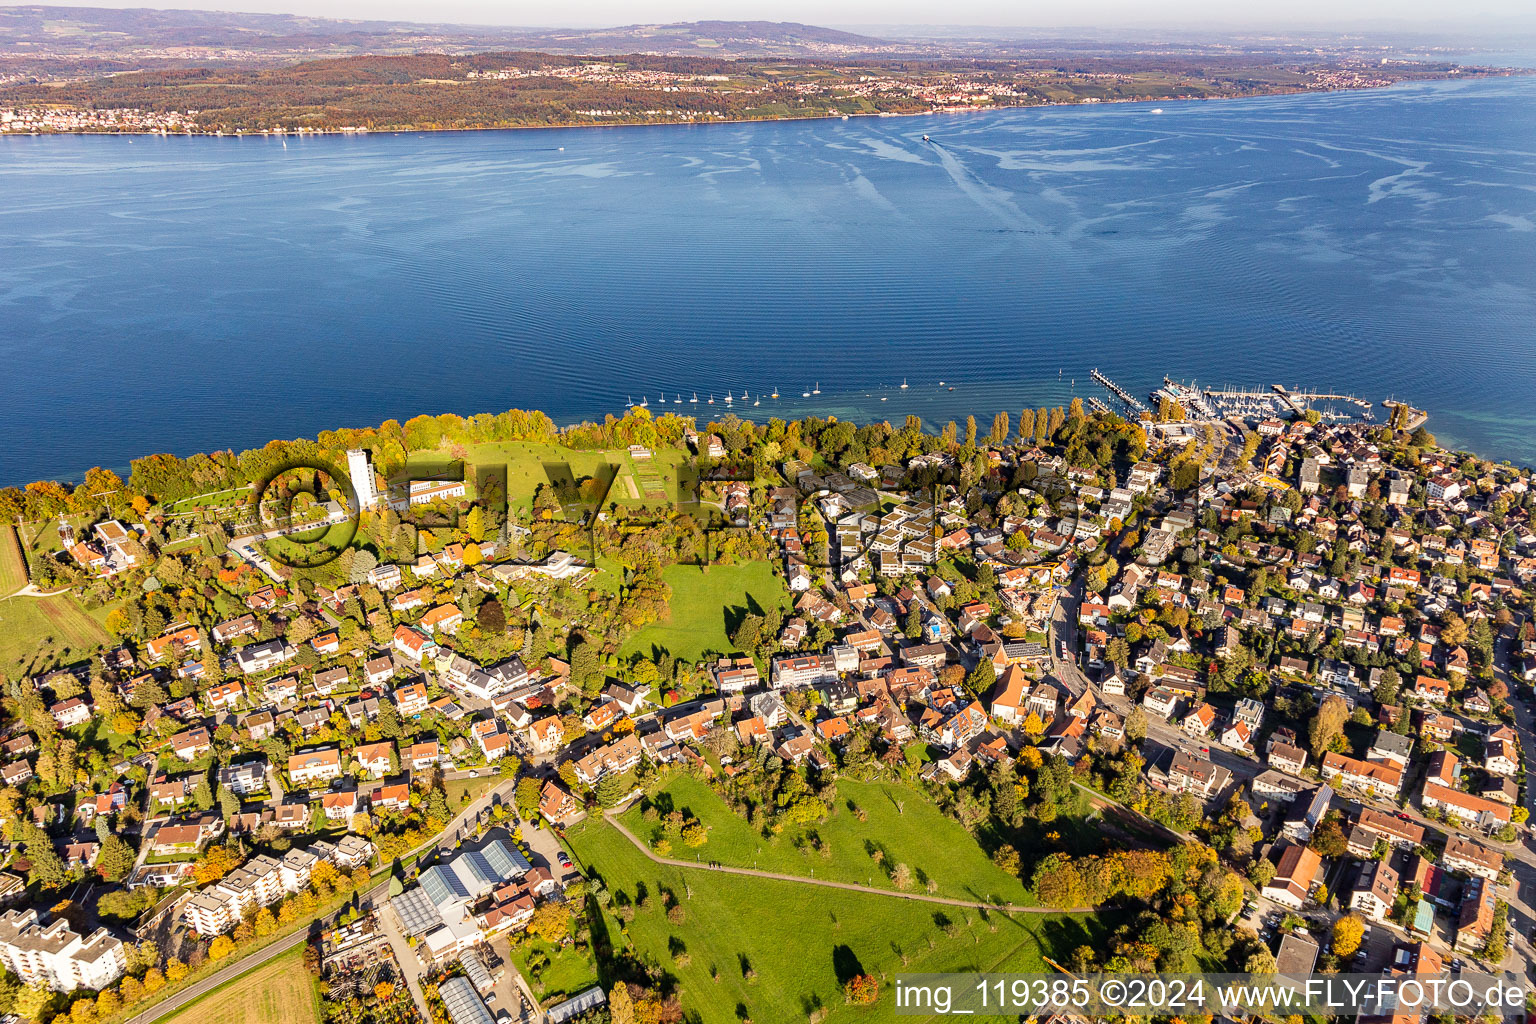 Lake Constance between Meersburg and the district Allmannsdorf in Konstanz in the state Baden-Wurttemberg, Germany